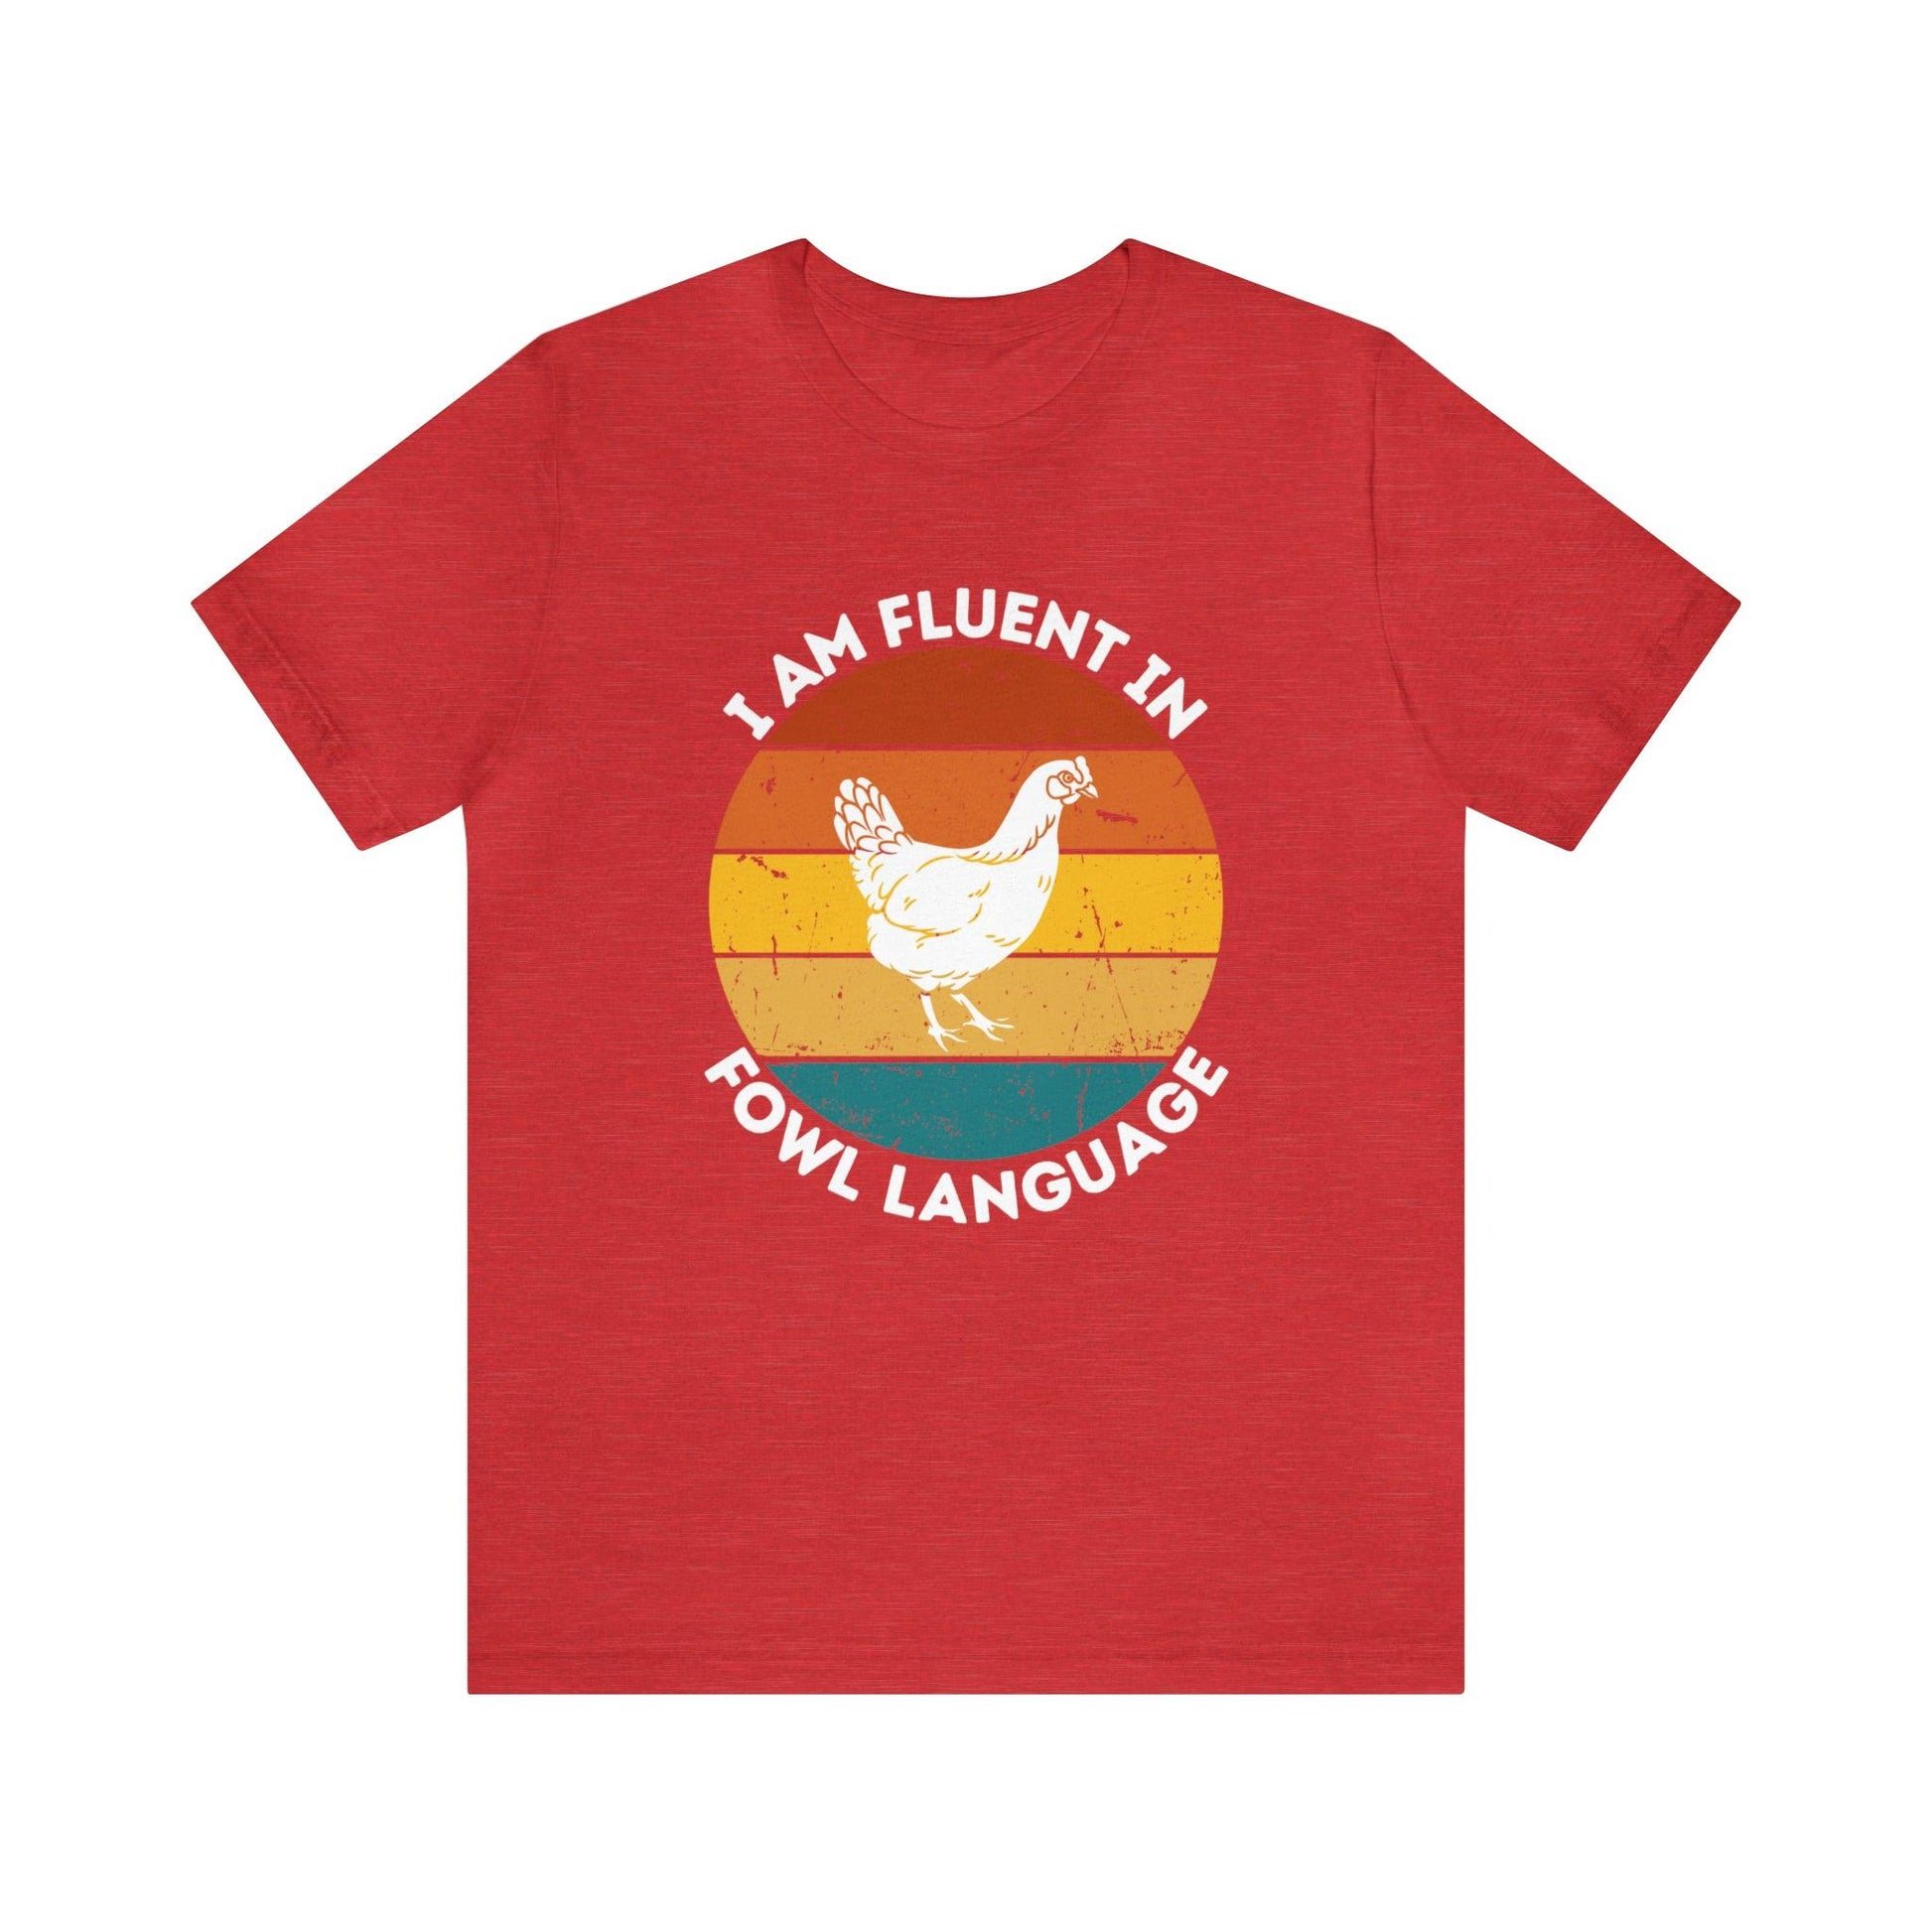 Funny Chicken Owner Gift, Farming Shirt for Farm Lover Shirt, Gift For Chicken Lover gift, Farmer Gift Shirt Chicken Tee Fowl Language shirt - Giftsmojo